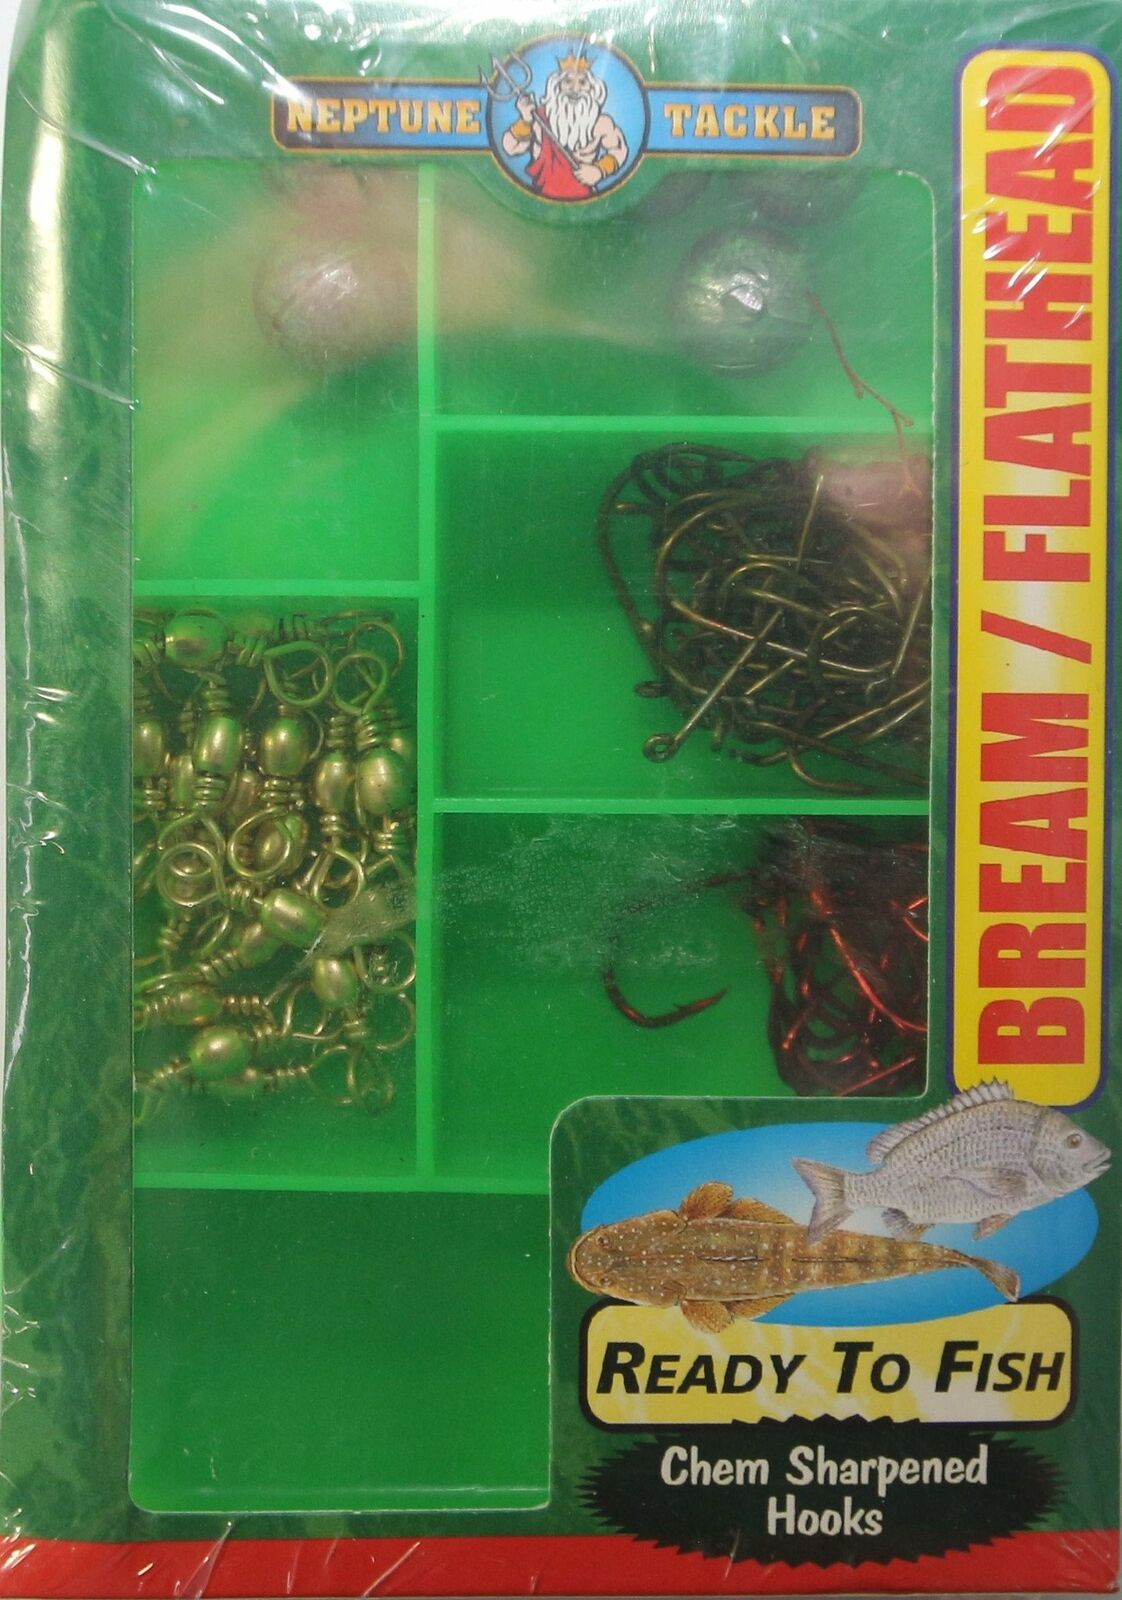 Neptune Tackle Bream Flathead Complete Tackle Kit Pack